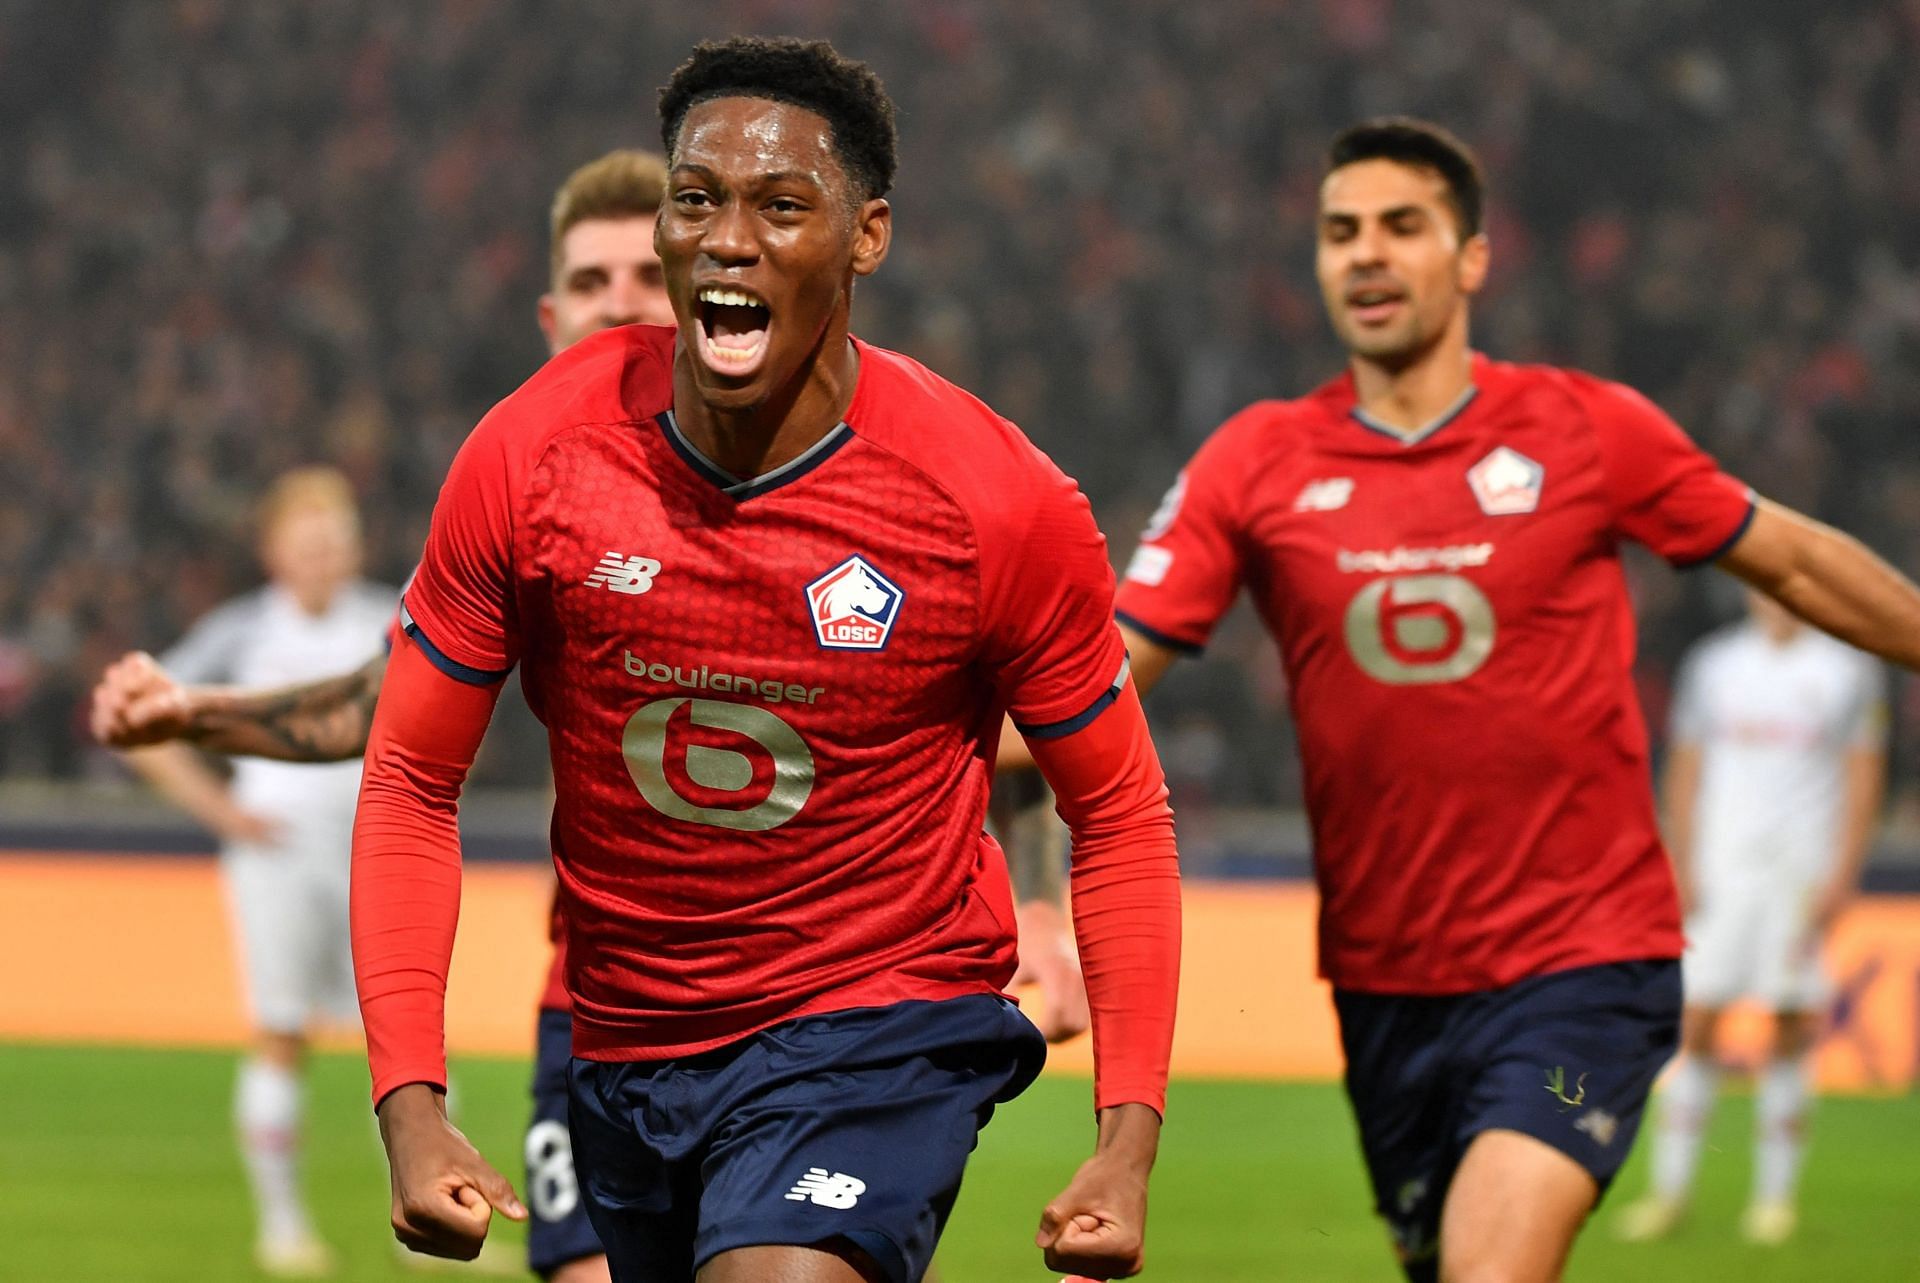 Lille hosts Metz in the Ligue 1 on Sunday